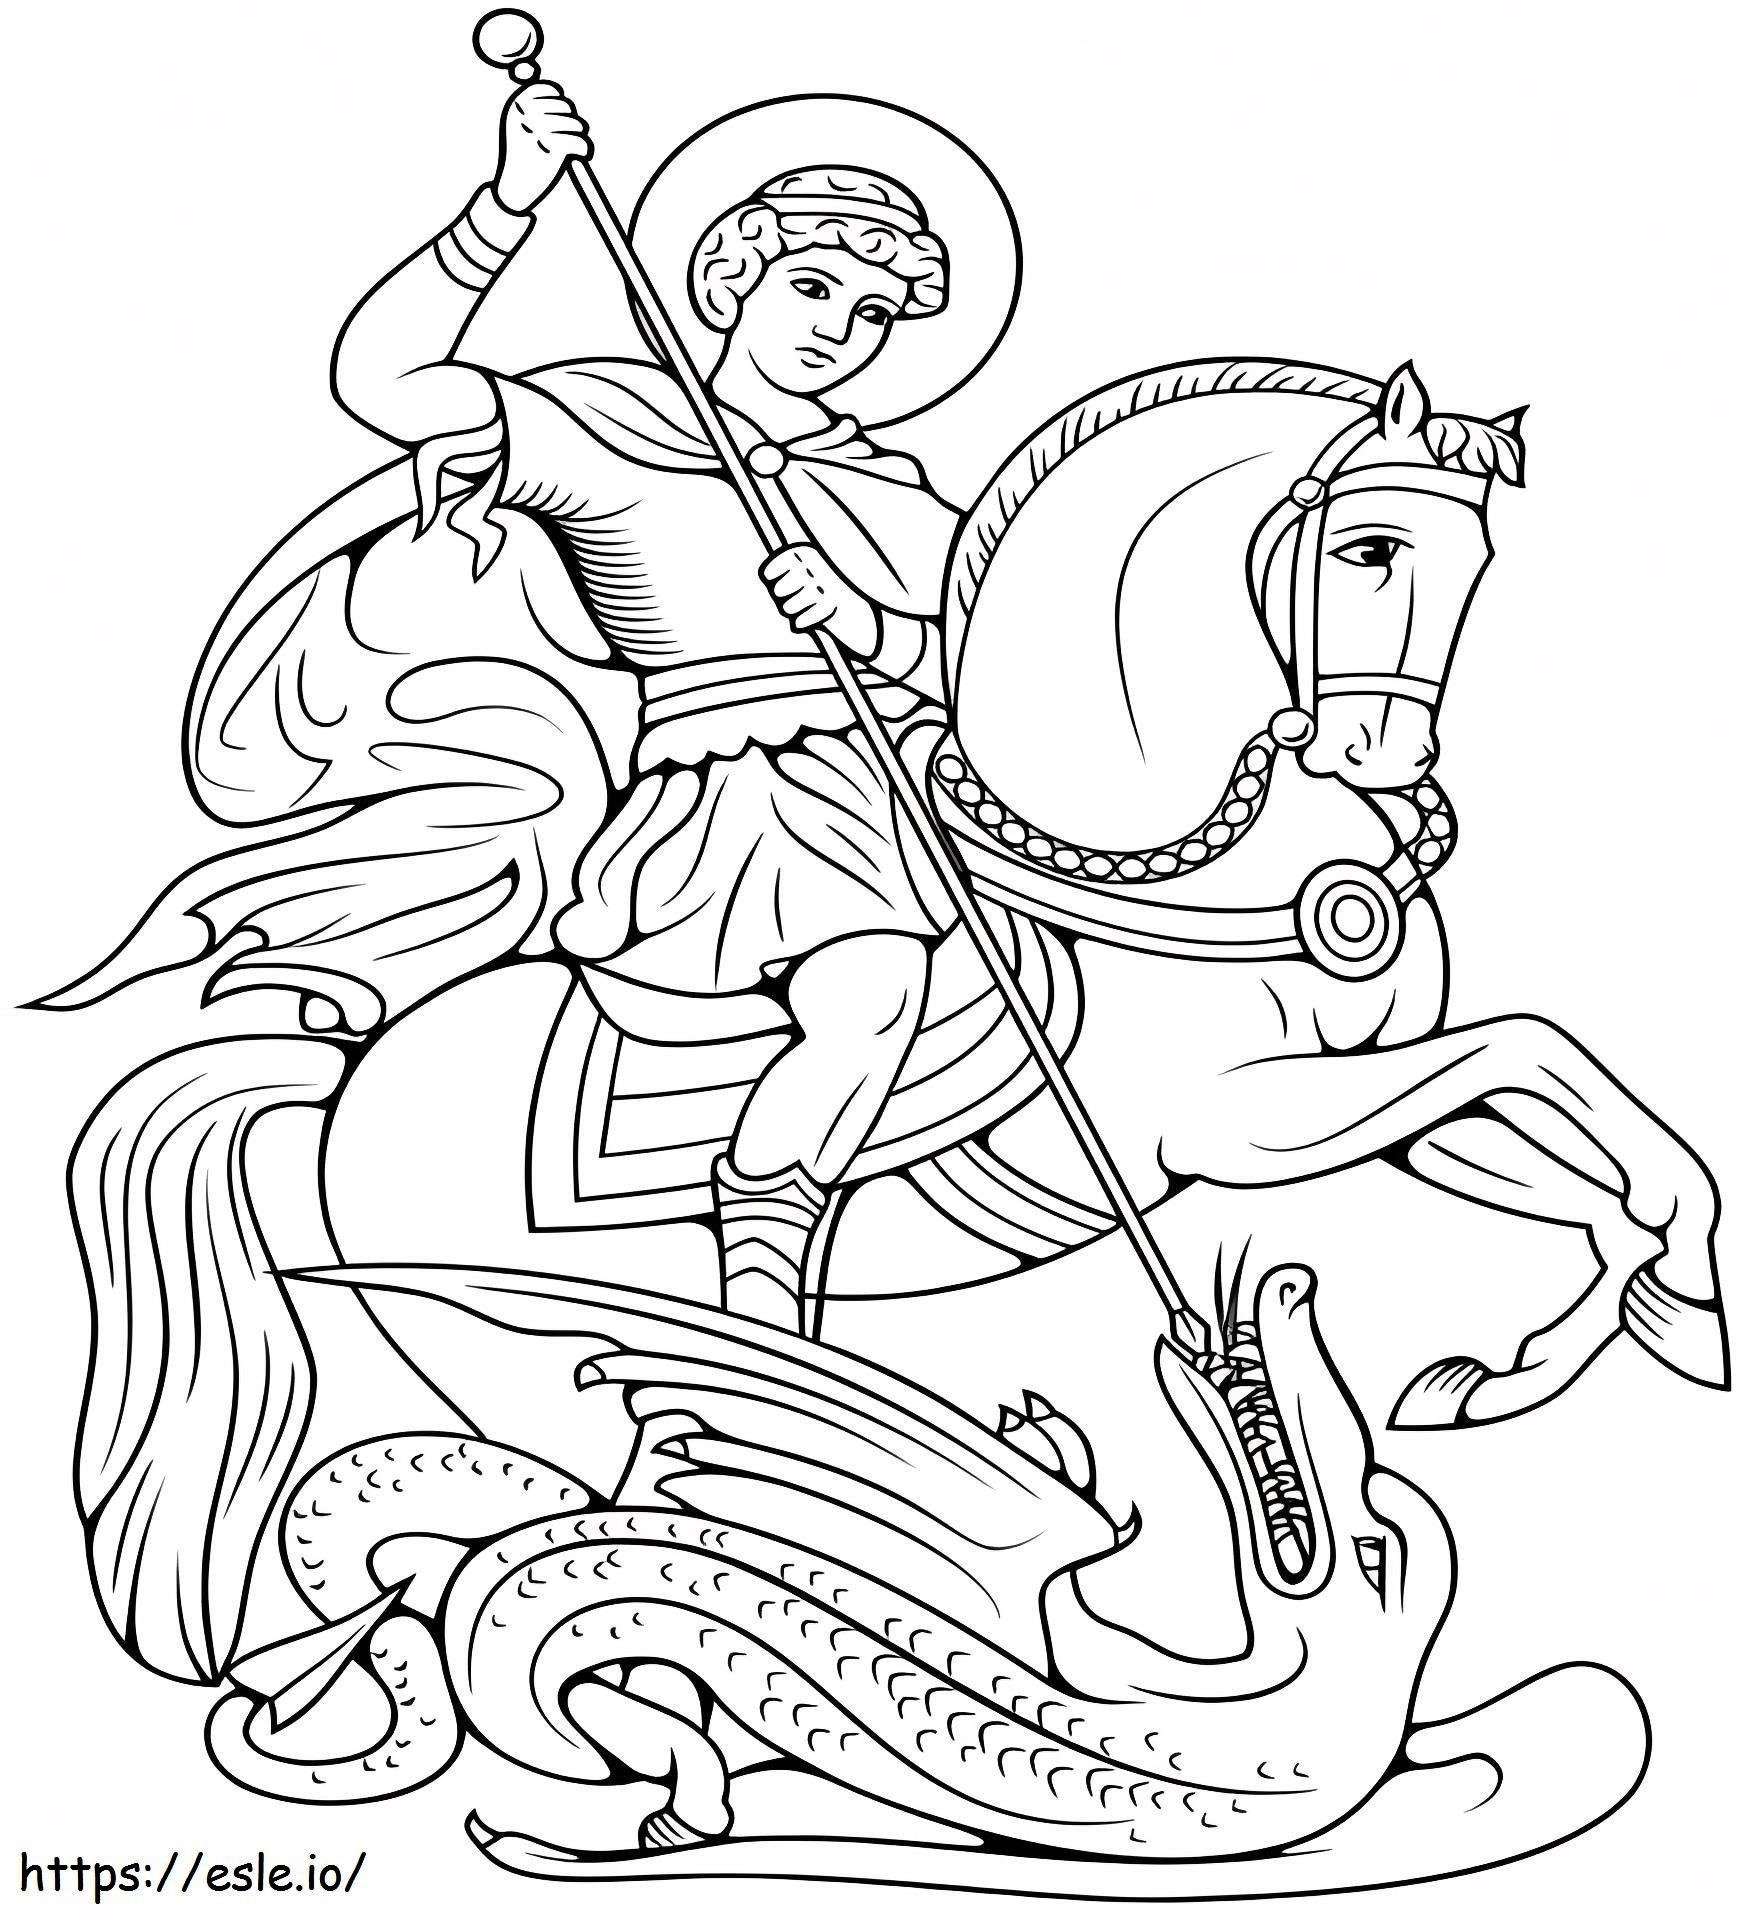 1527061736_Saint George Slaying The Dragon coloring page